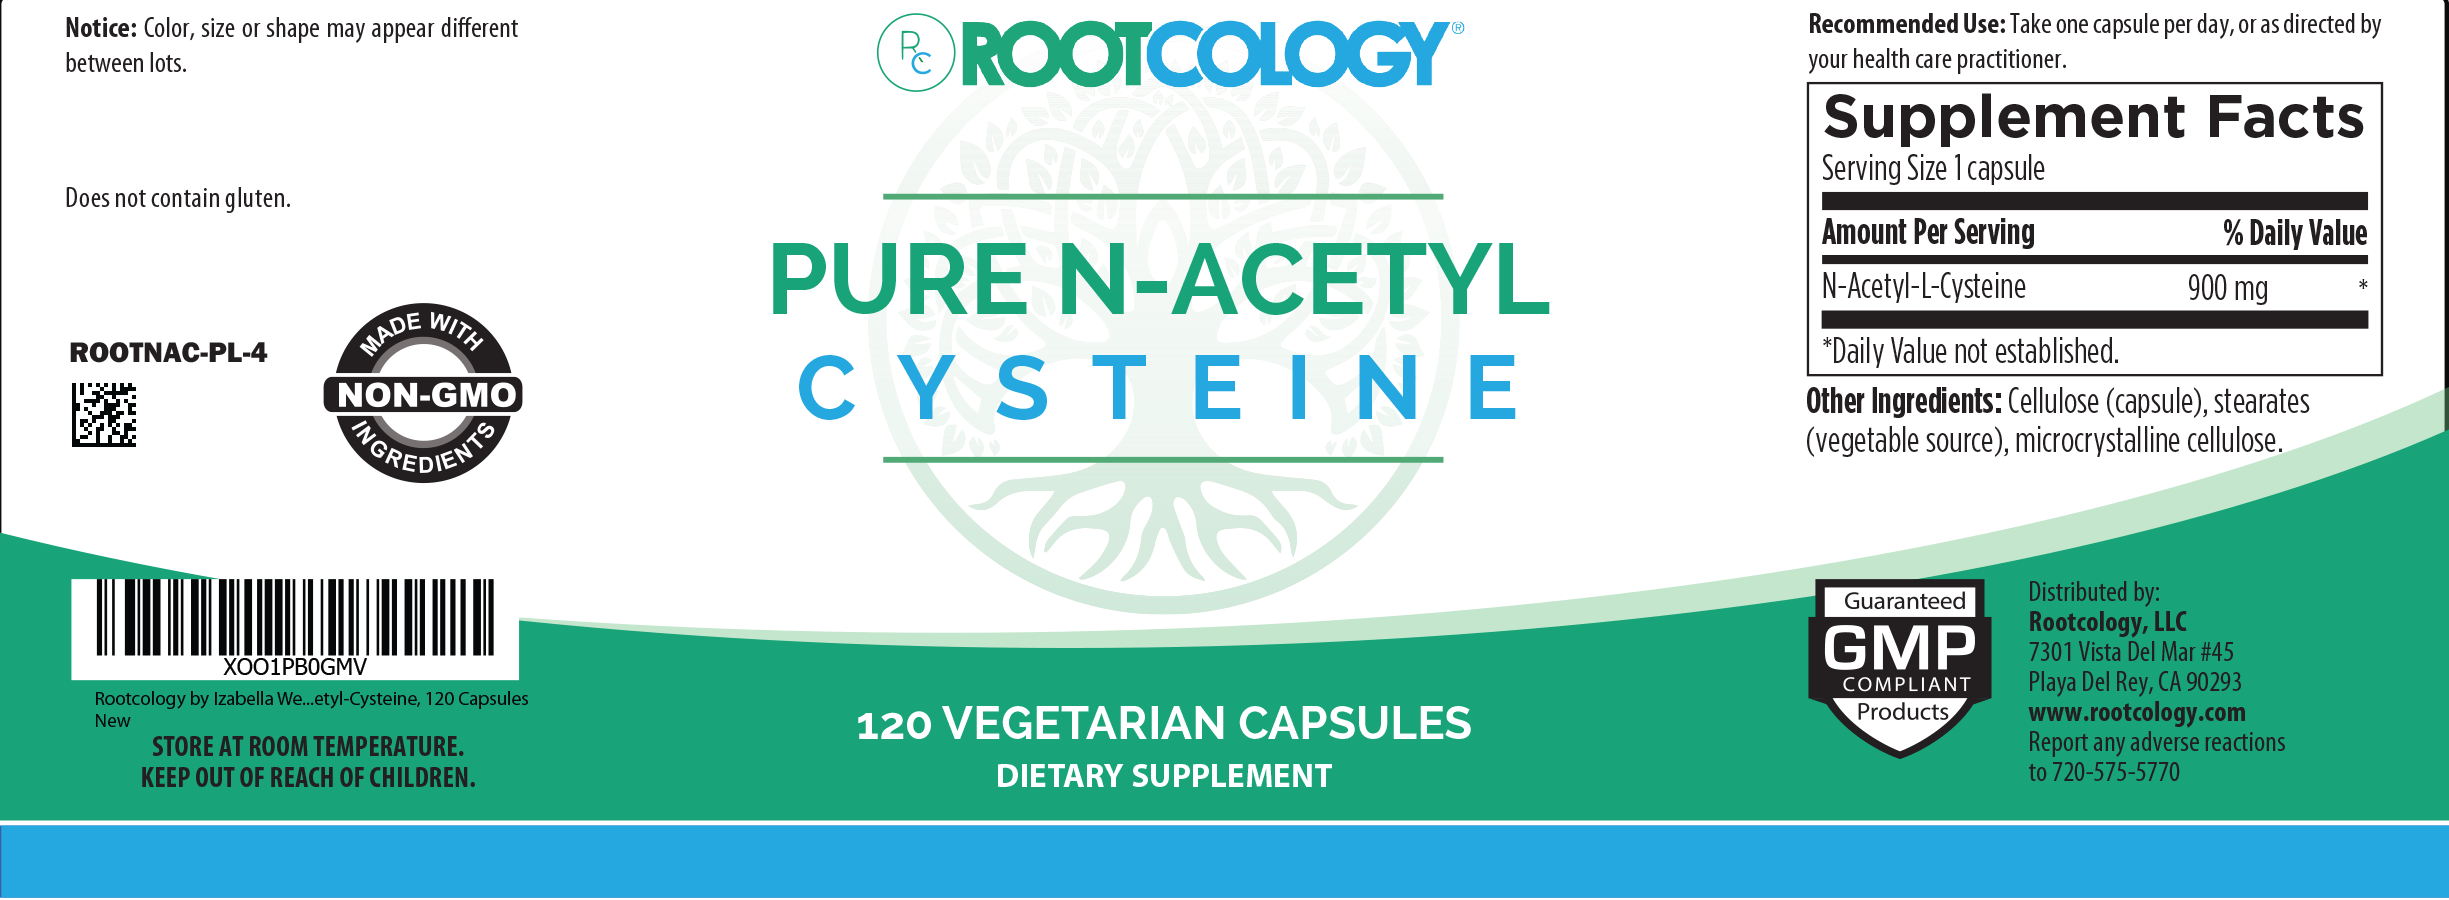 Rootcology Pure N-acetyl Cysteine Supplement Label